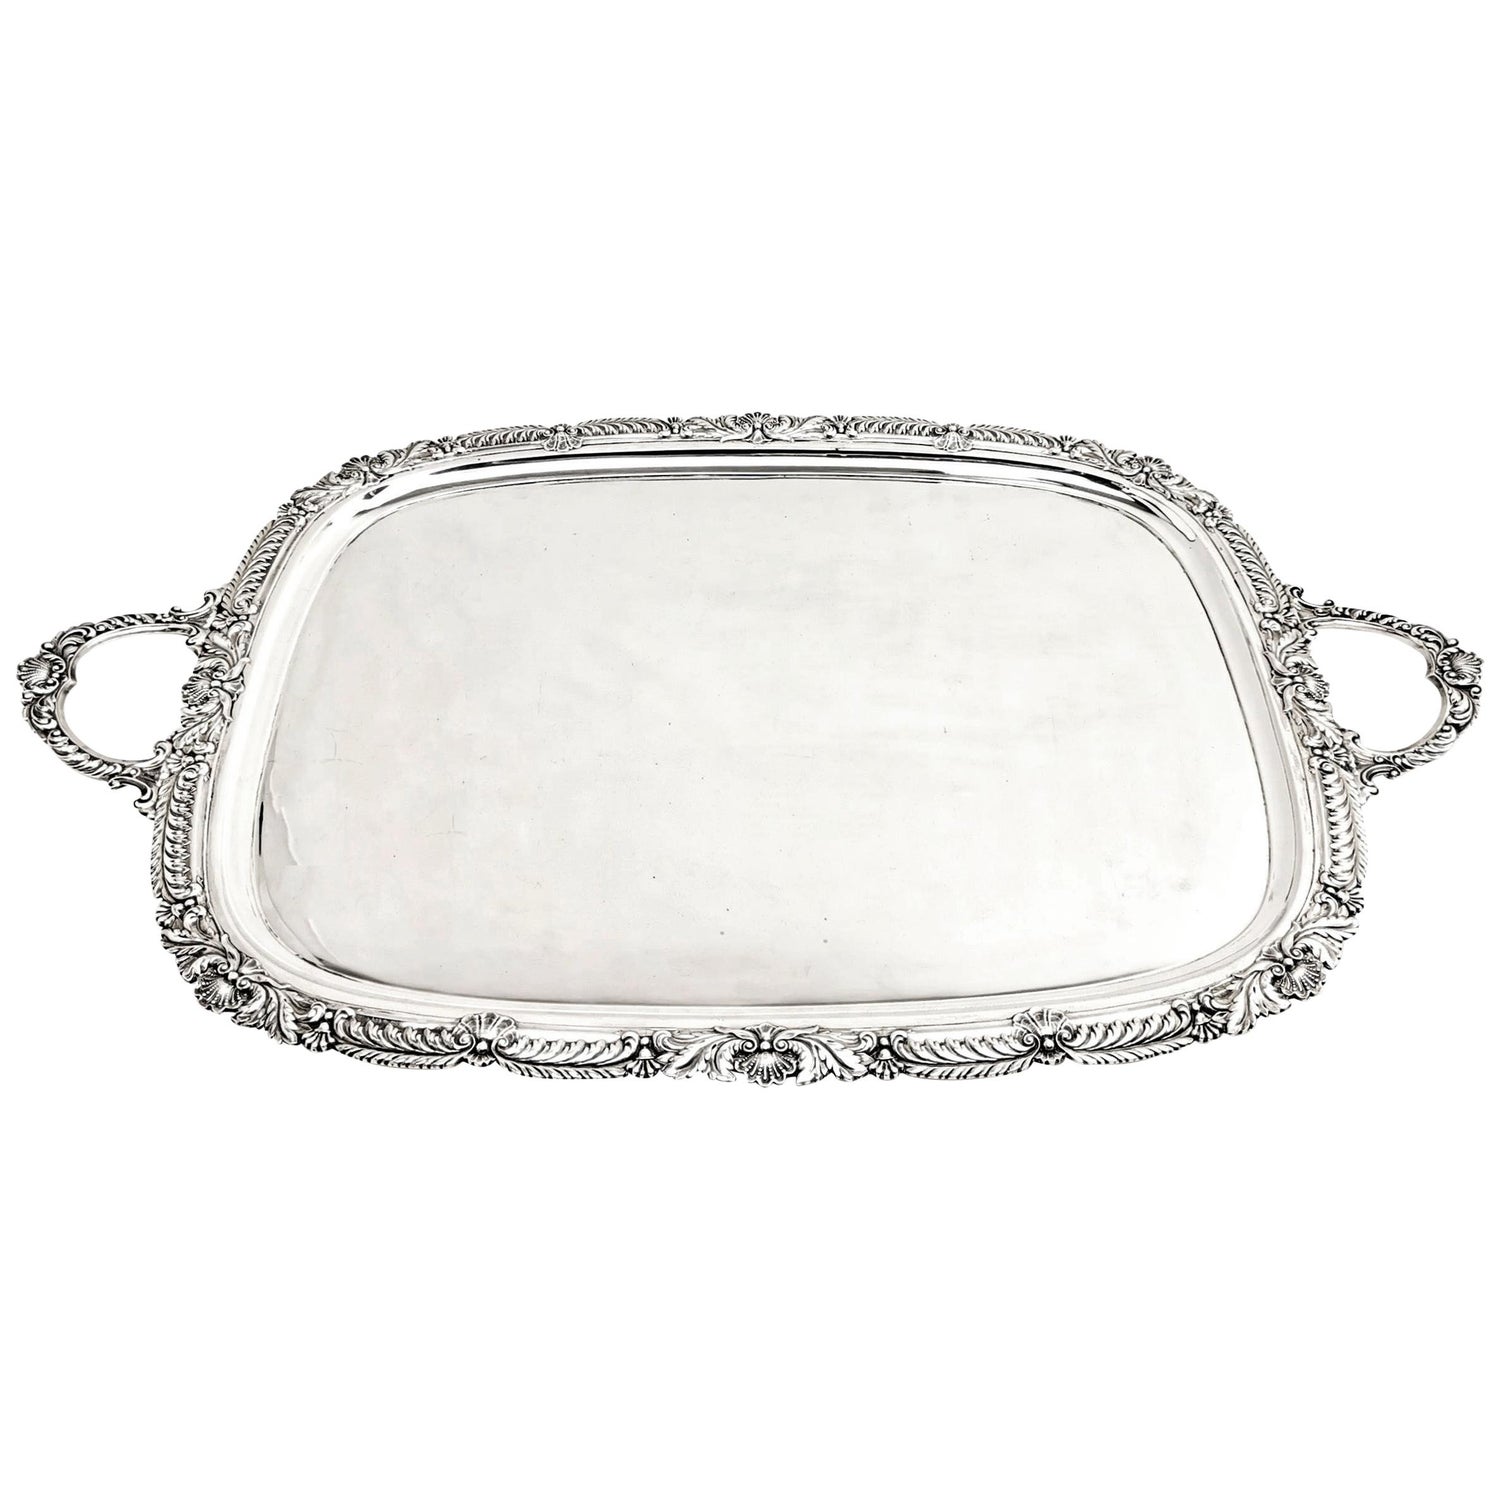 Large Antique Sterling Silver Serving Tray or Tea Tray 1908 Shell and Gadroon